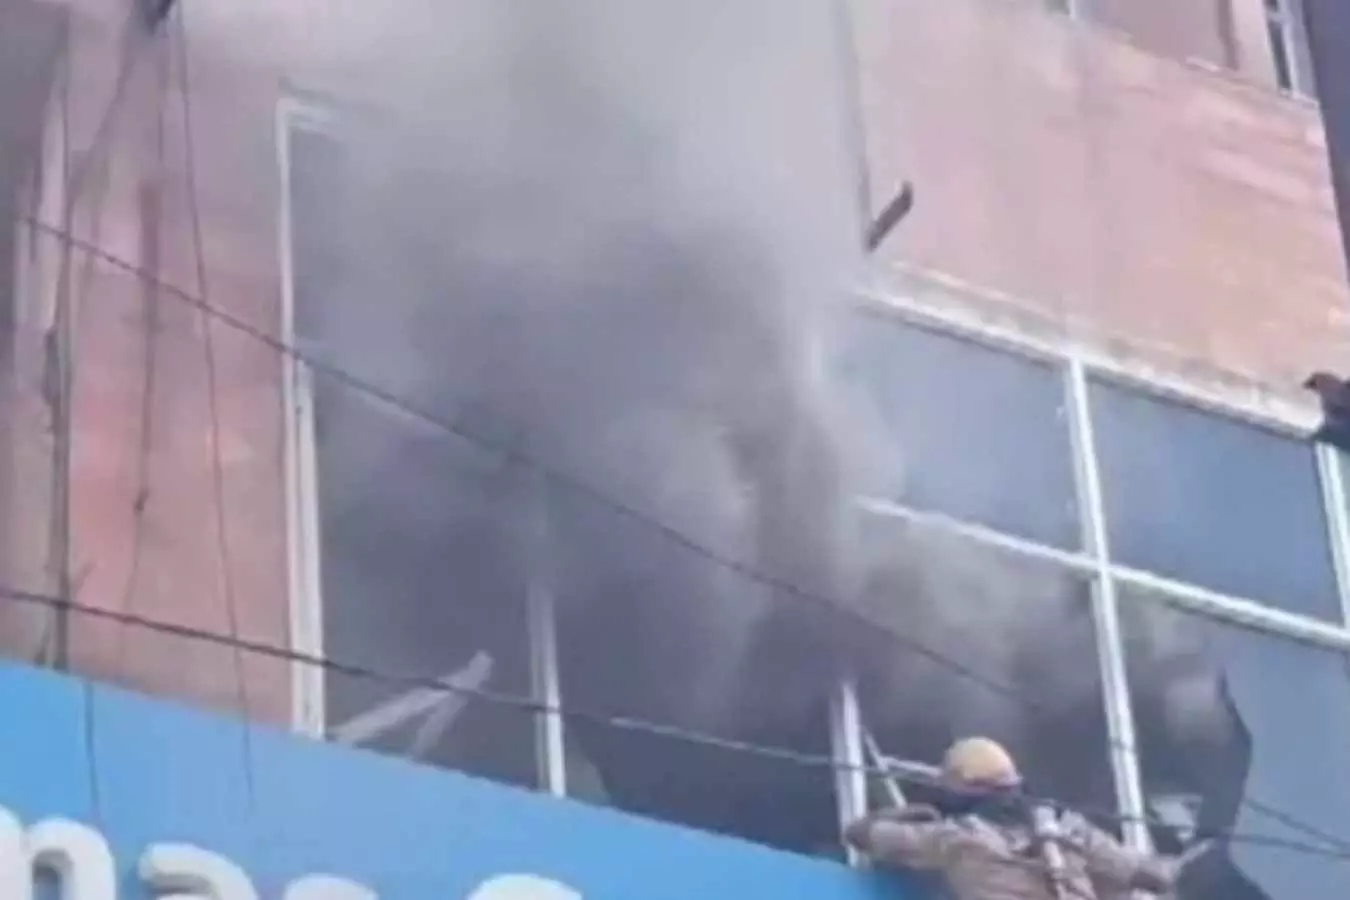 massive fire broke out in three storey building in noida sector 18 fire rescued 15 people